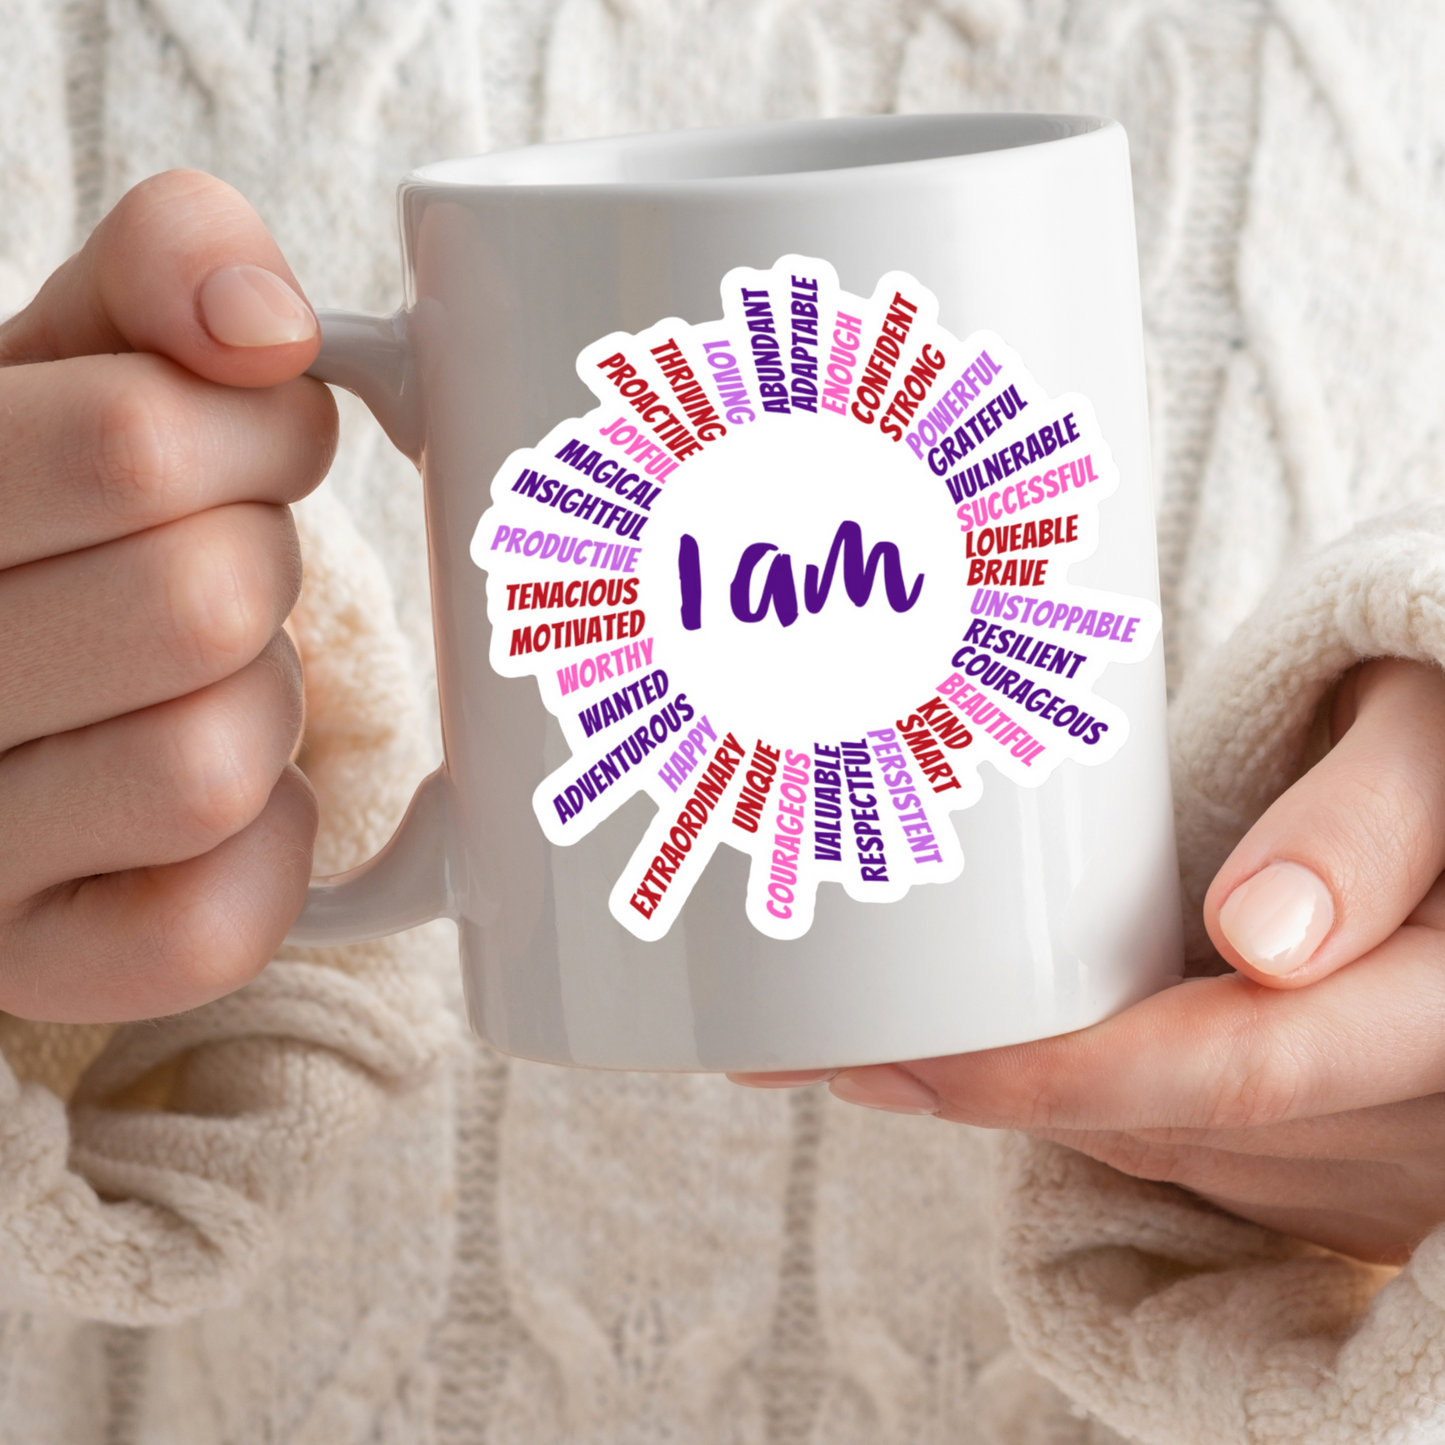 AFFIRMATION, Mantra, Meditation, Motivational, I AM Sun Vinyl Sticker. Has 36 positive words like rays of the sun. The middle says, I AM. Colors are pink, purple, red on a coffee mug